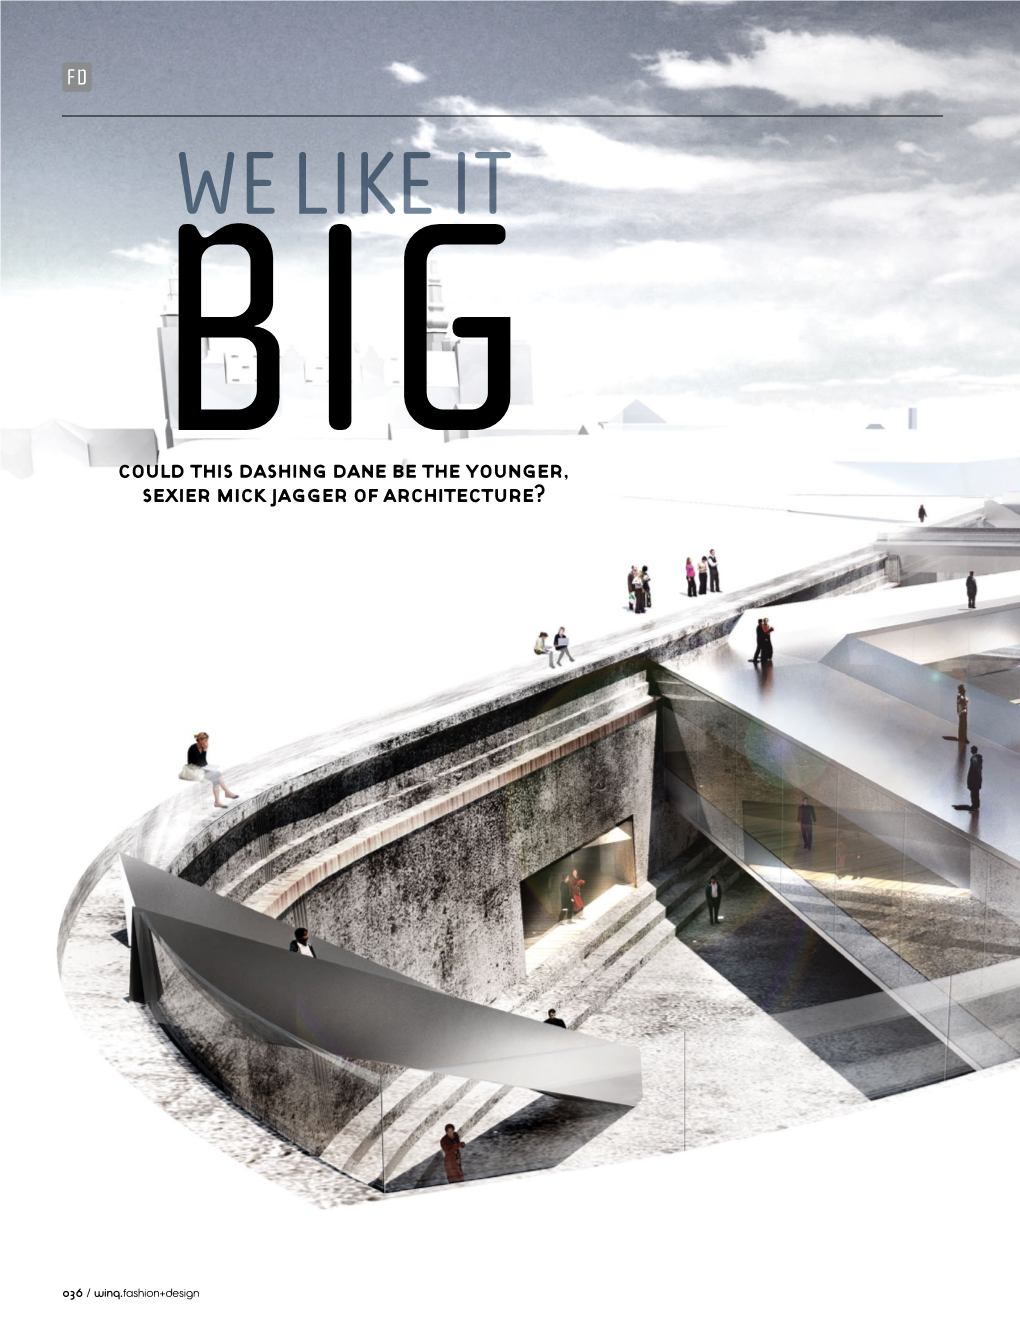 Bjarke Ingels Is the Founding Architect of Big (Big.Dk), Which Was Established in 2006, and Has Offices in New York and Copenhagen